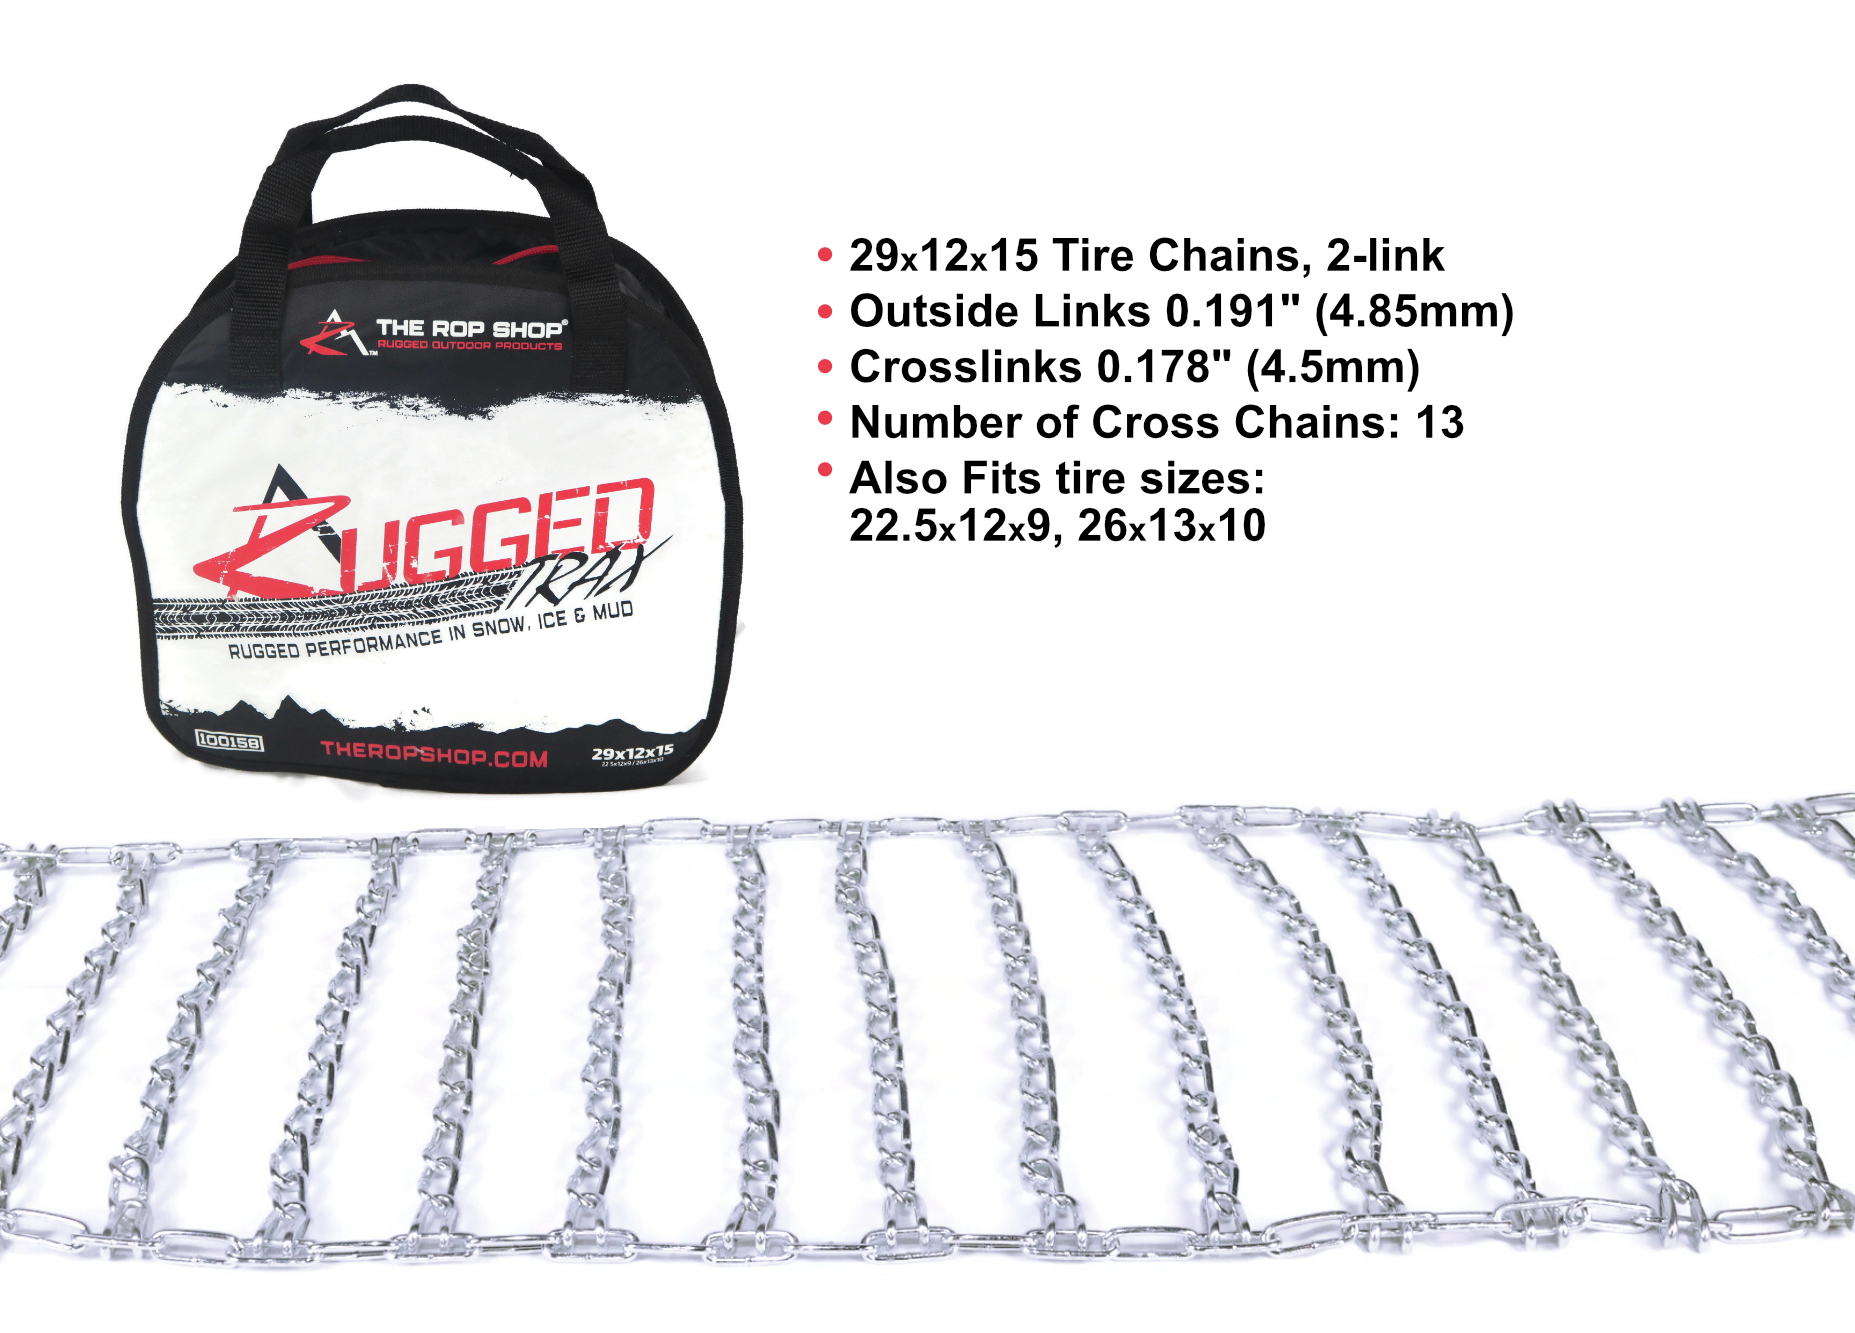 The ROP Shop | Pair 4 Link Tire Chains 29x12x15 for Sears Craftsman Lawn Mower Tractor Rider - image 2 of 6